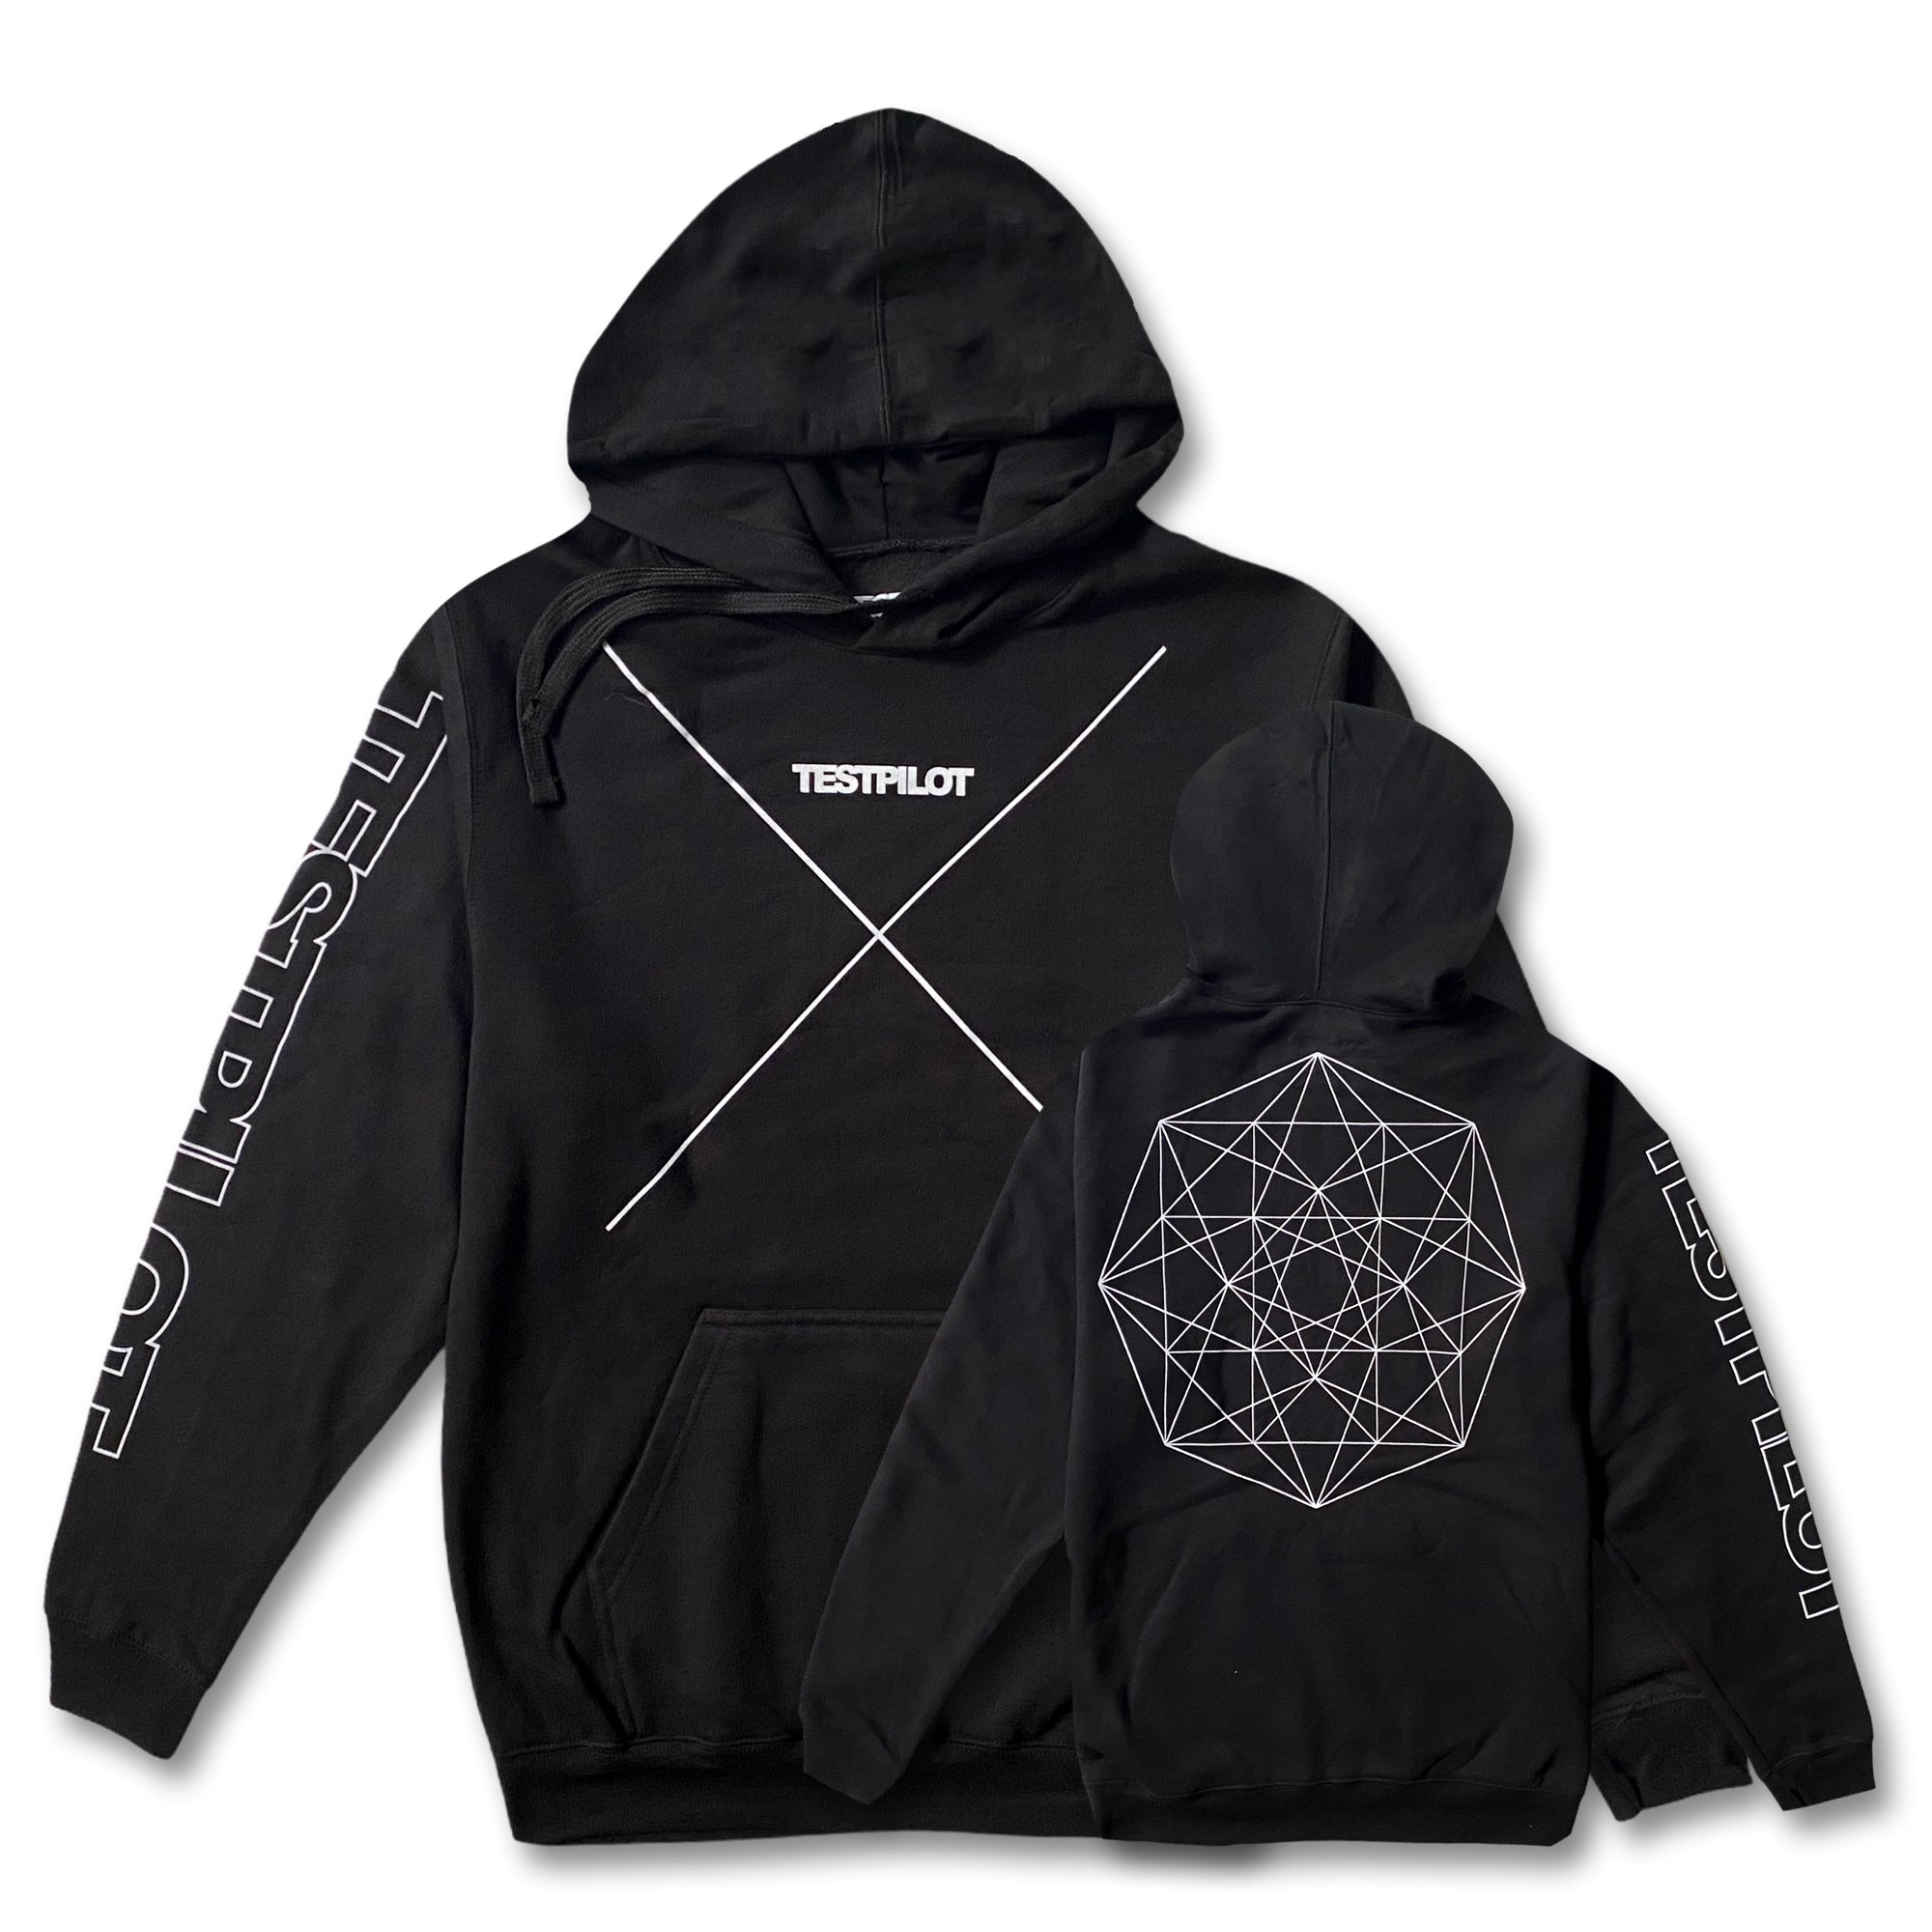 Testpilot - place pullover hoodie